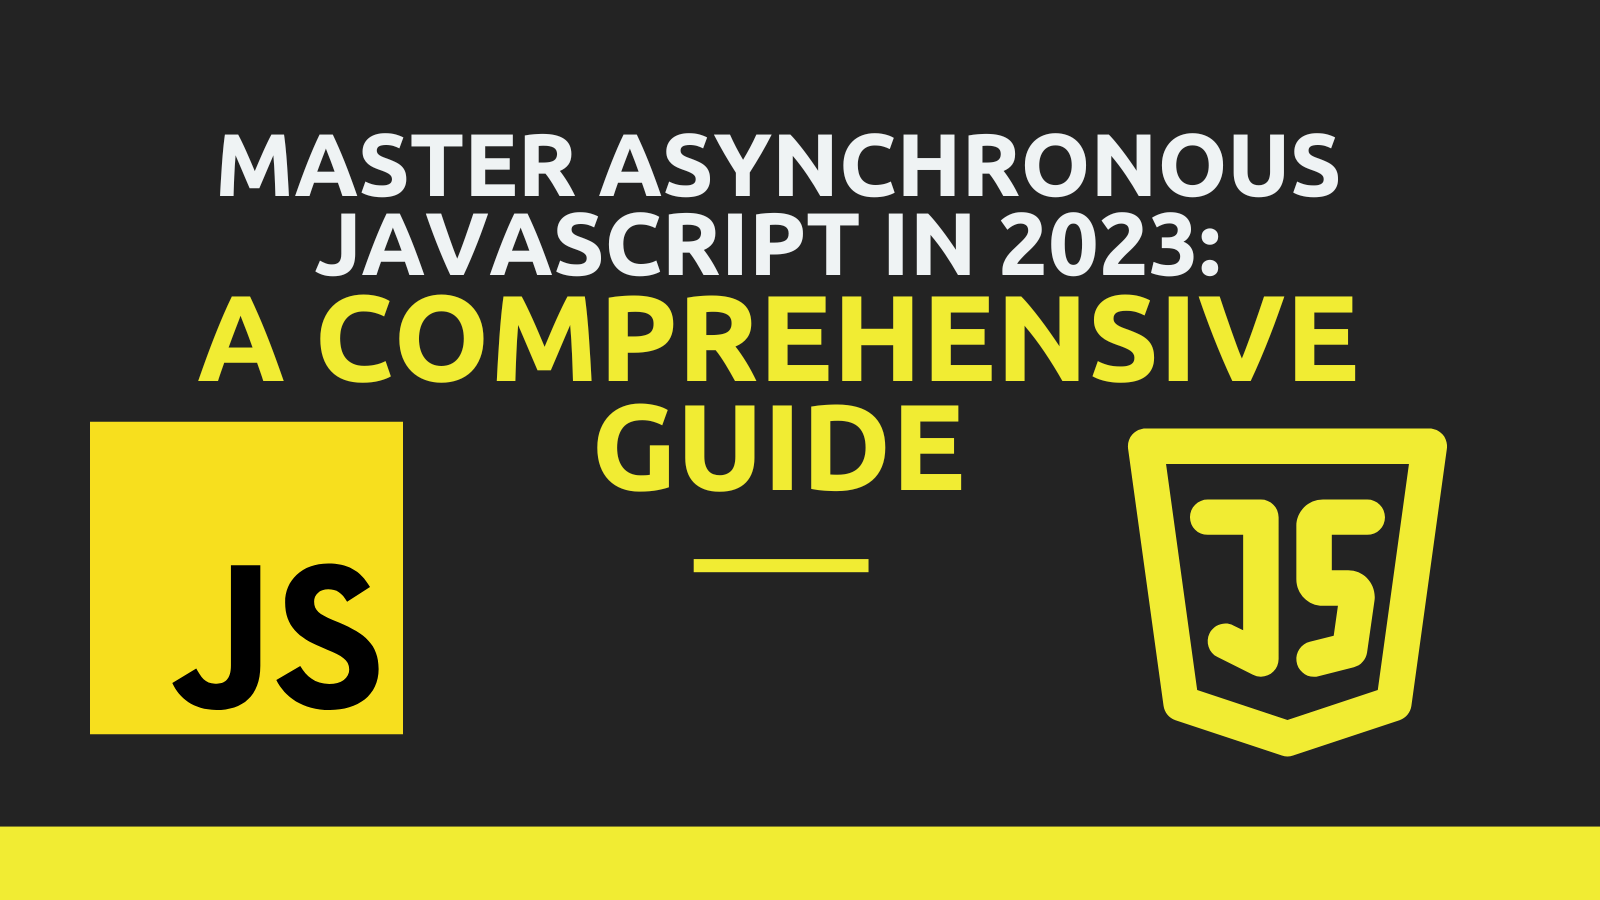 Master Asynchronous JavaScript in 2023: A Comprehensive Guide